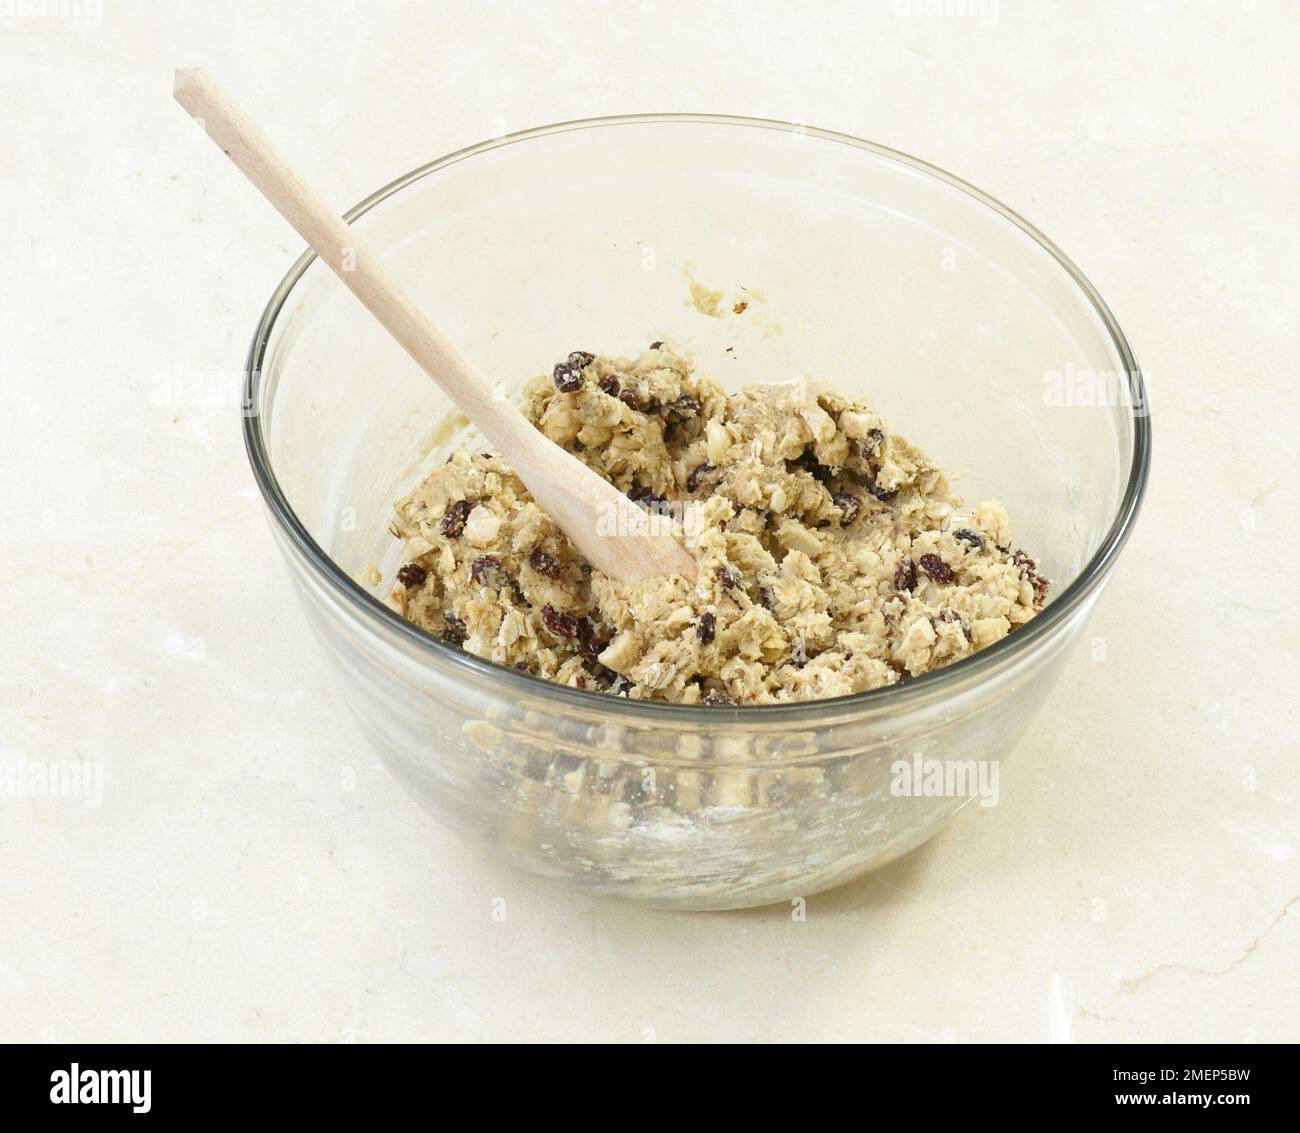 Making Hazelnut and Raisin Oat Cookies, combining the ingredients to form a dough Stock Photo